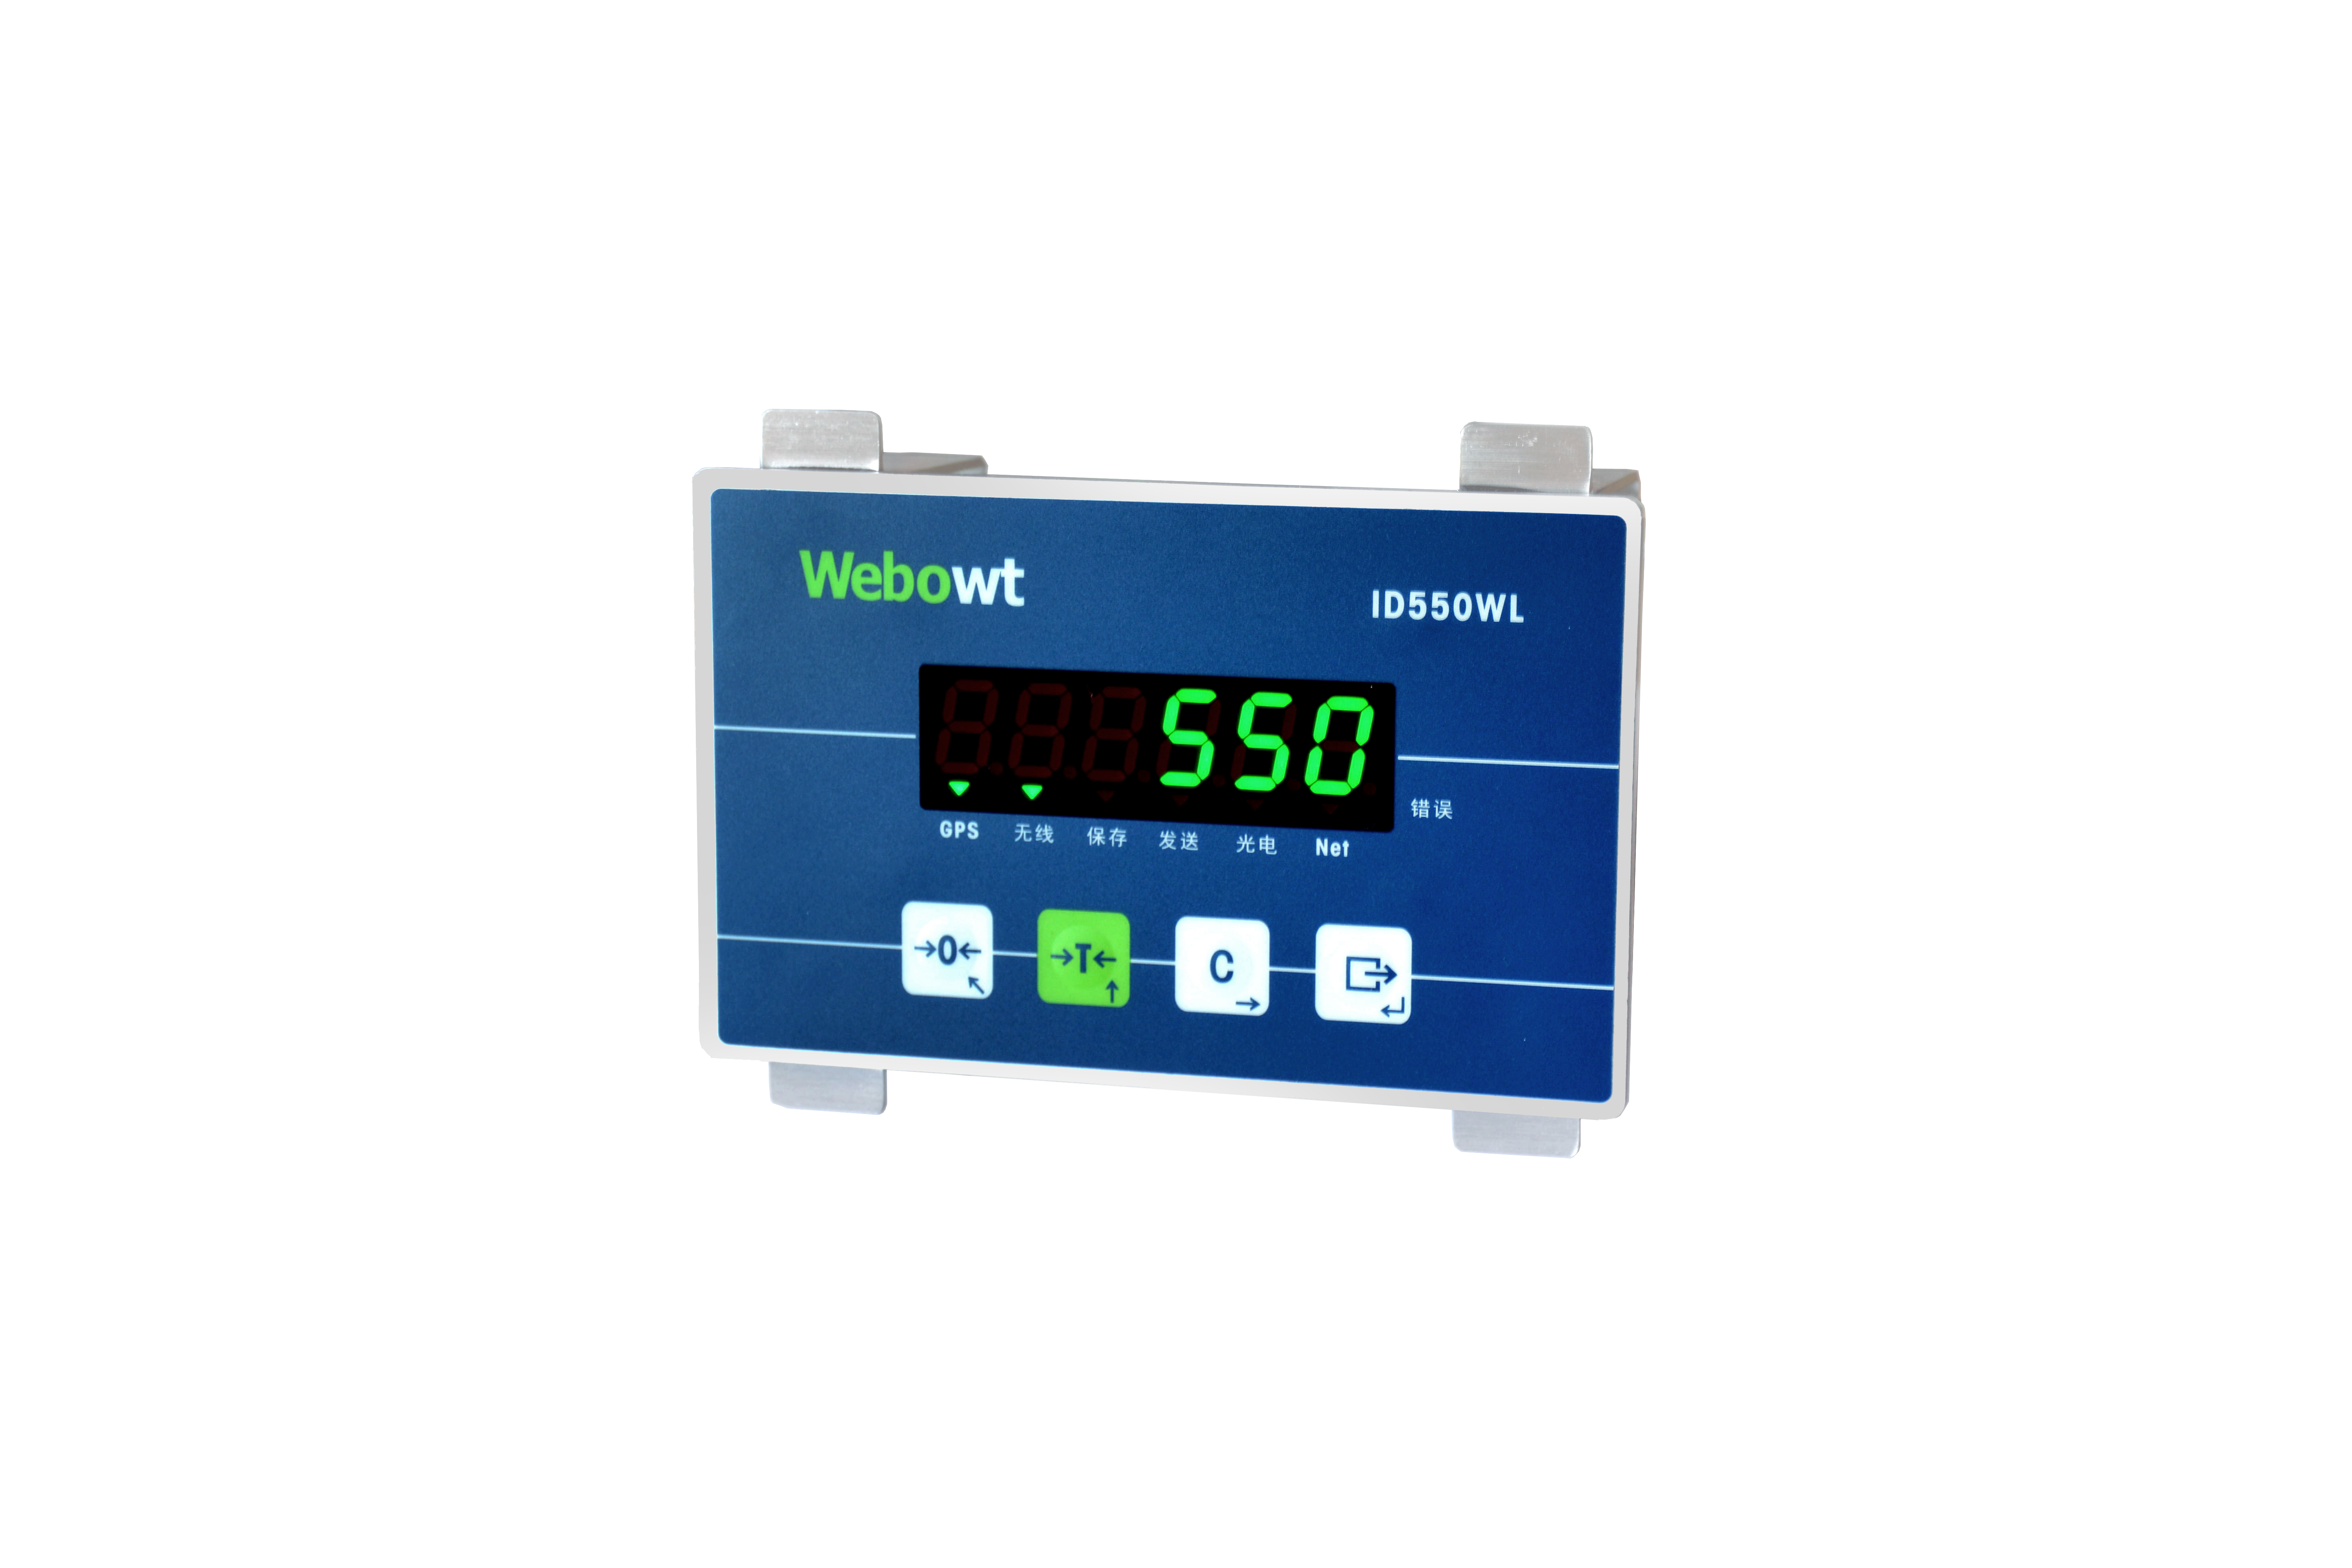 Order No. 855WL03, Model No.:ID550WLA11100D, ID550WL, Panel, Input x 1/ Output x 2, GPS, 2G, Waste truck Weighing, with ABS enclosure, 220VAC, built-in power switch